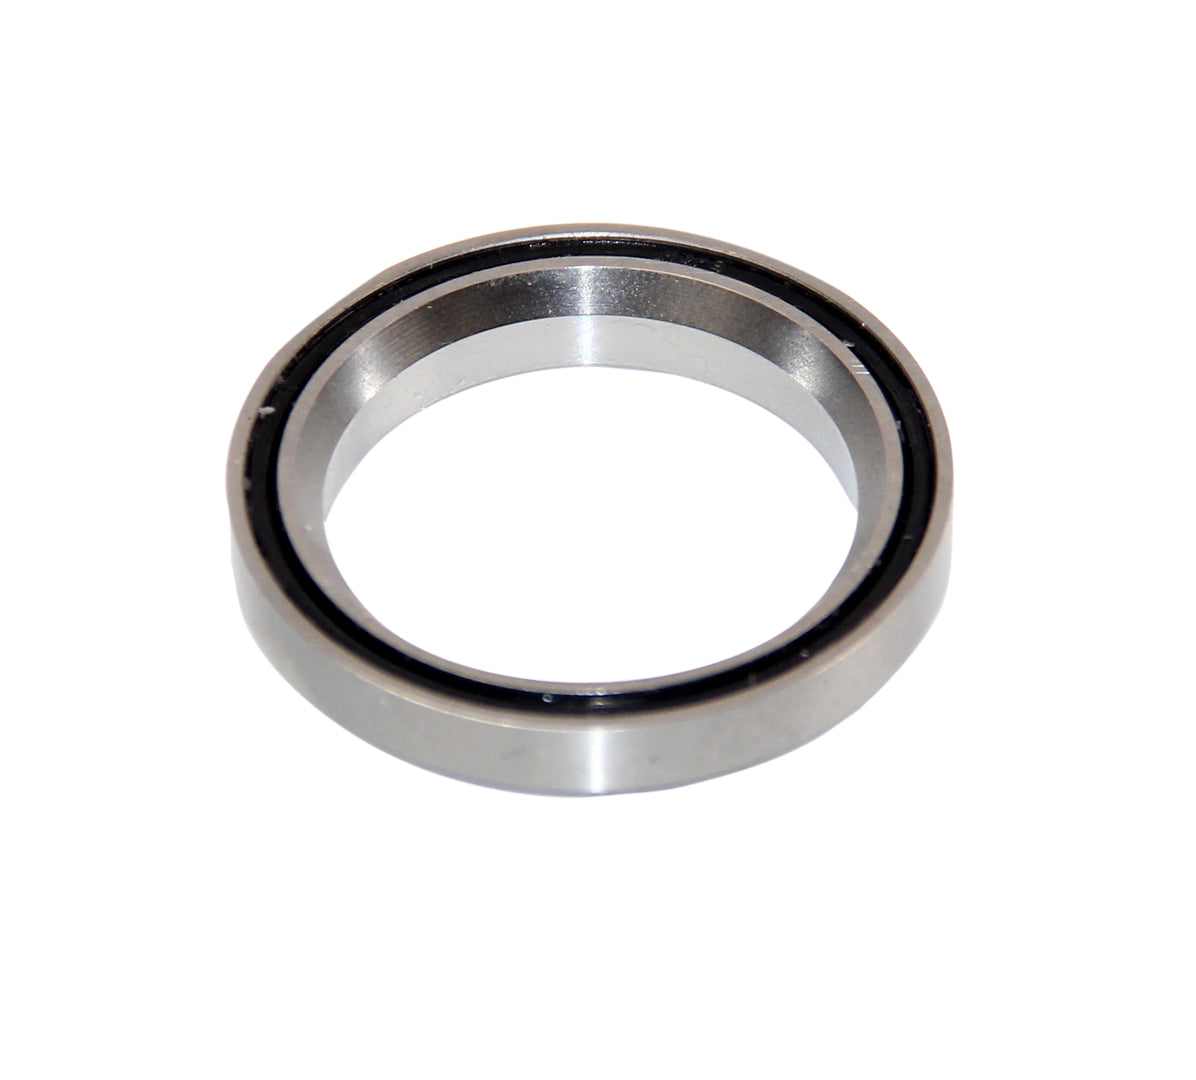 Hope 42mm Cup 8 Headset Bearing